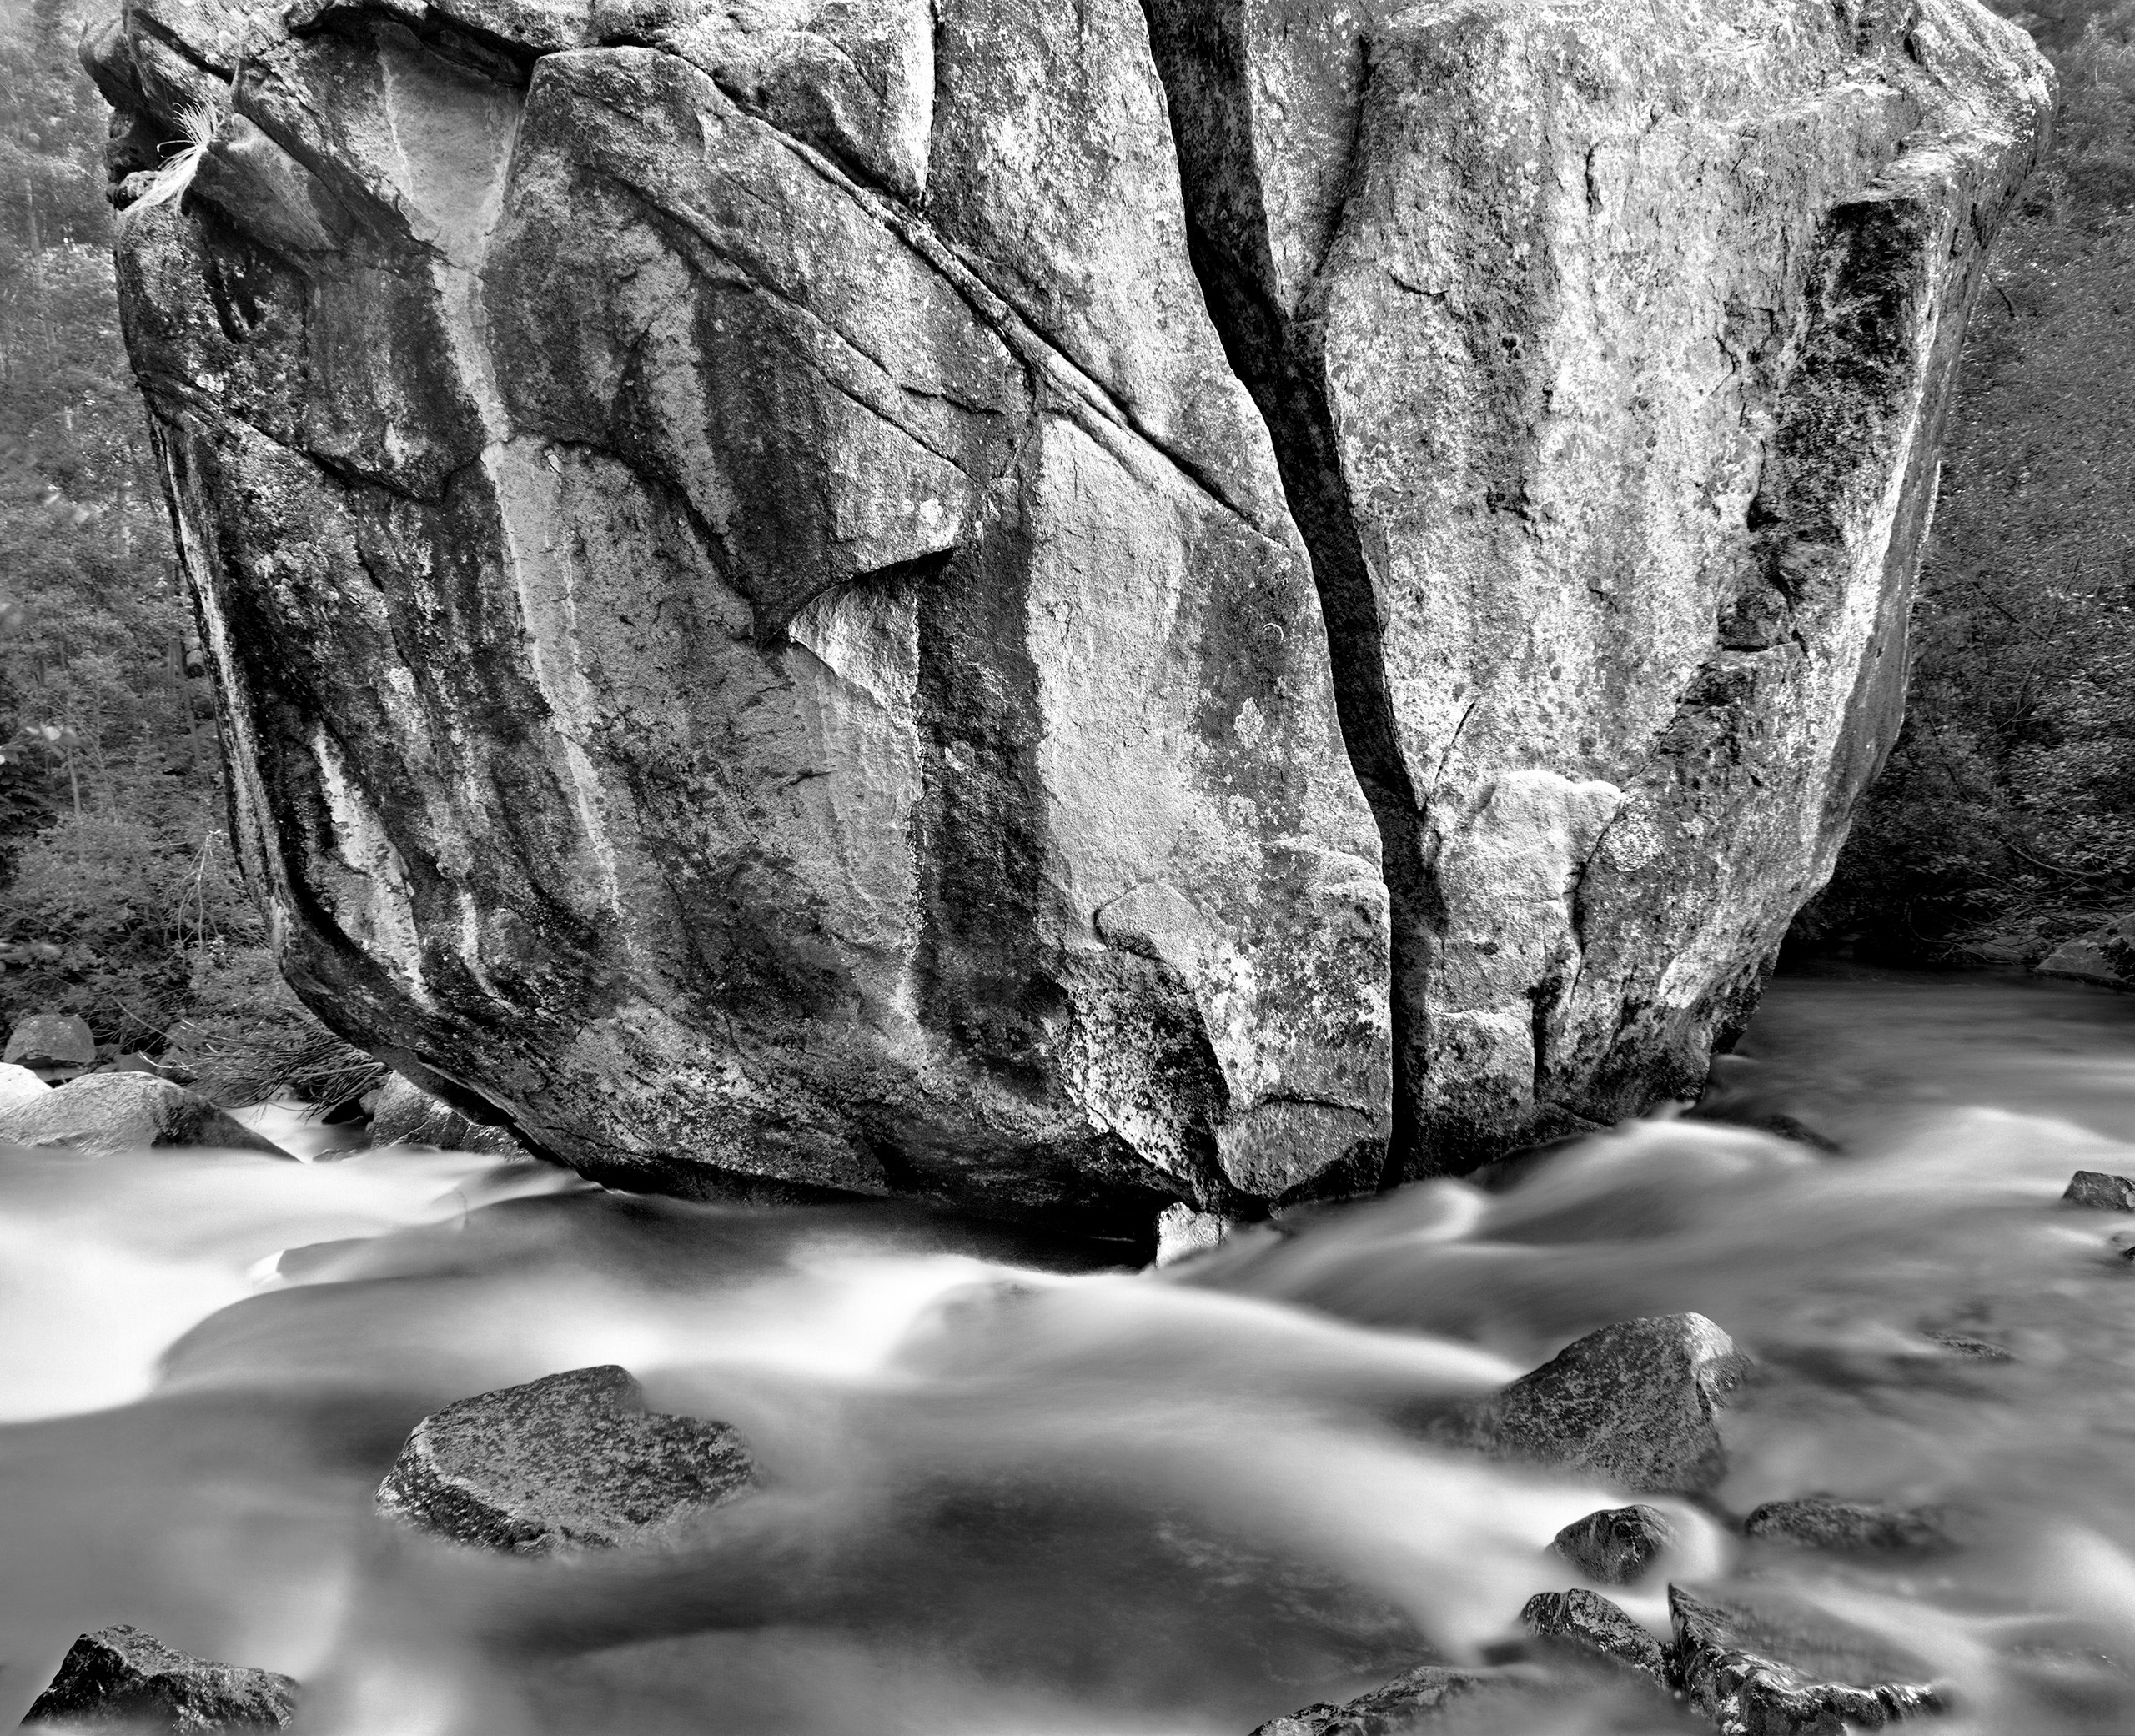 Fractured Glacial Erratic, Roaring Fork River below Independence Pass, Colorado